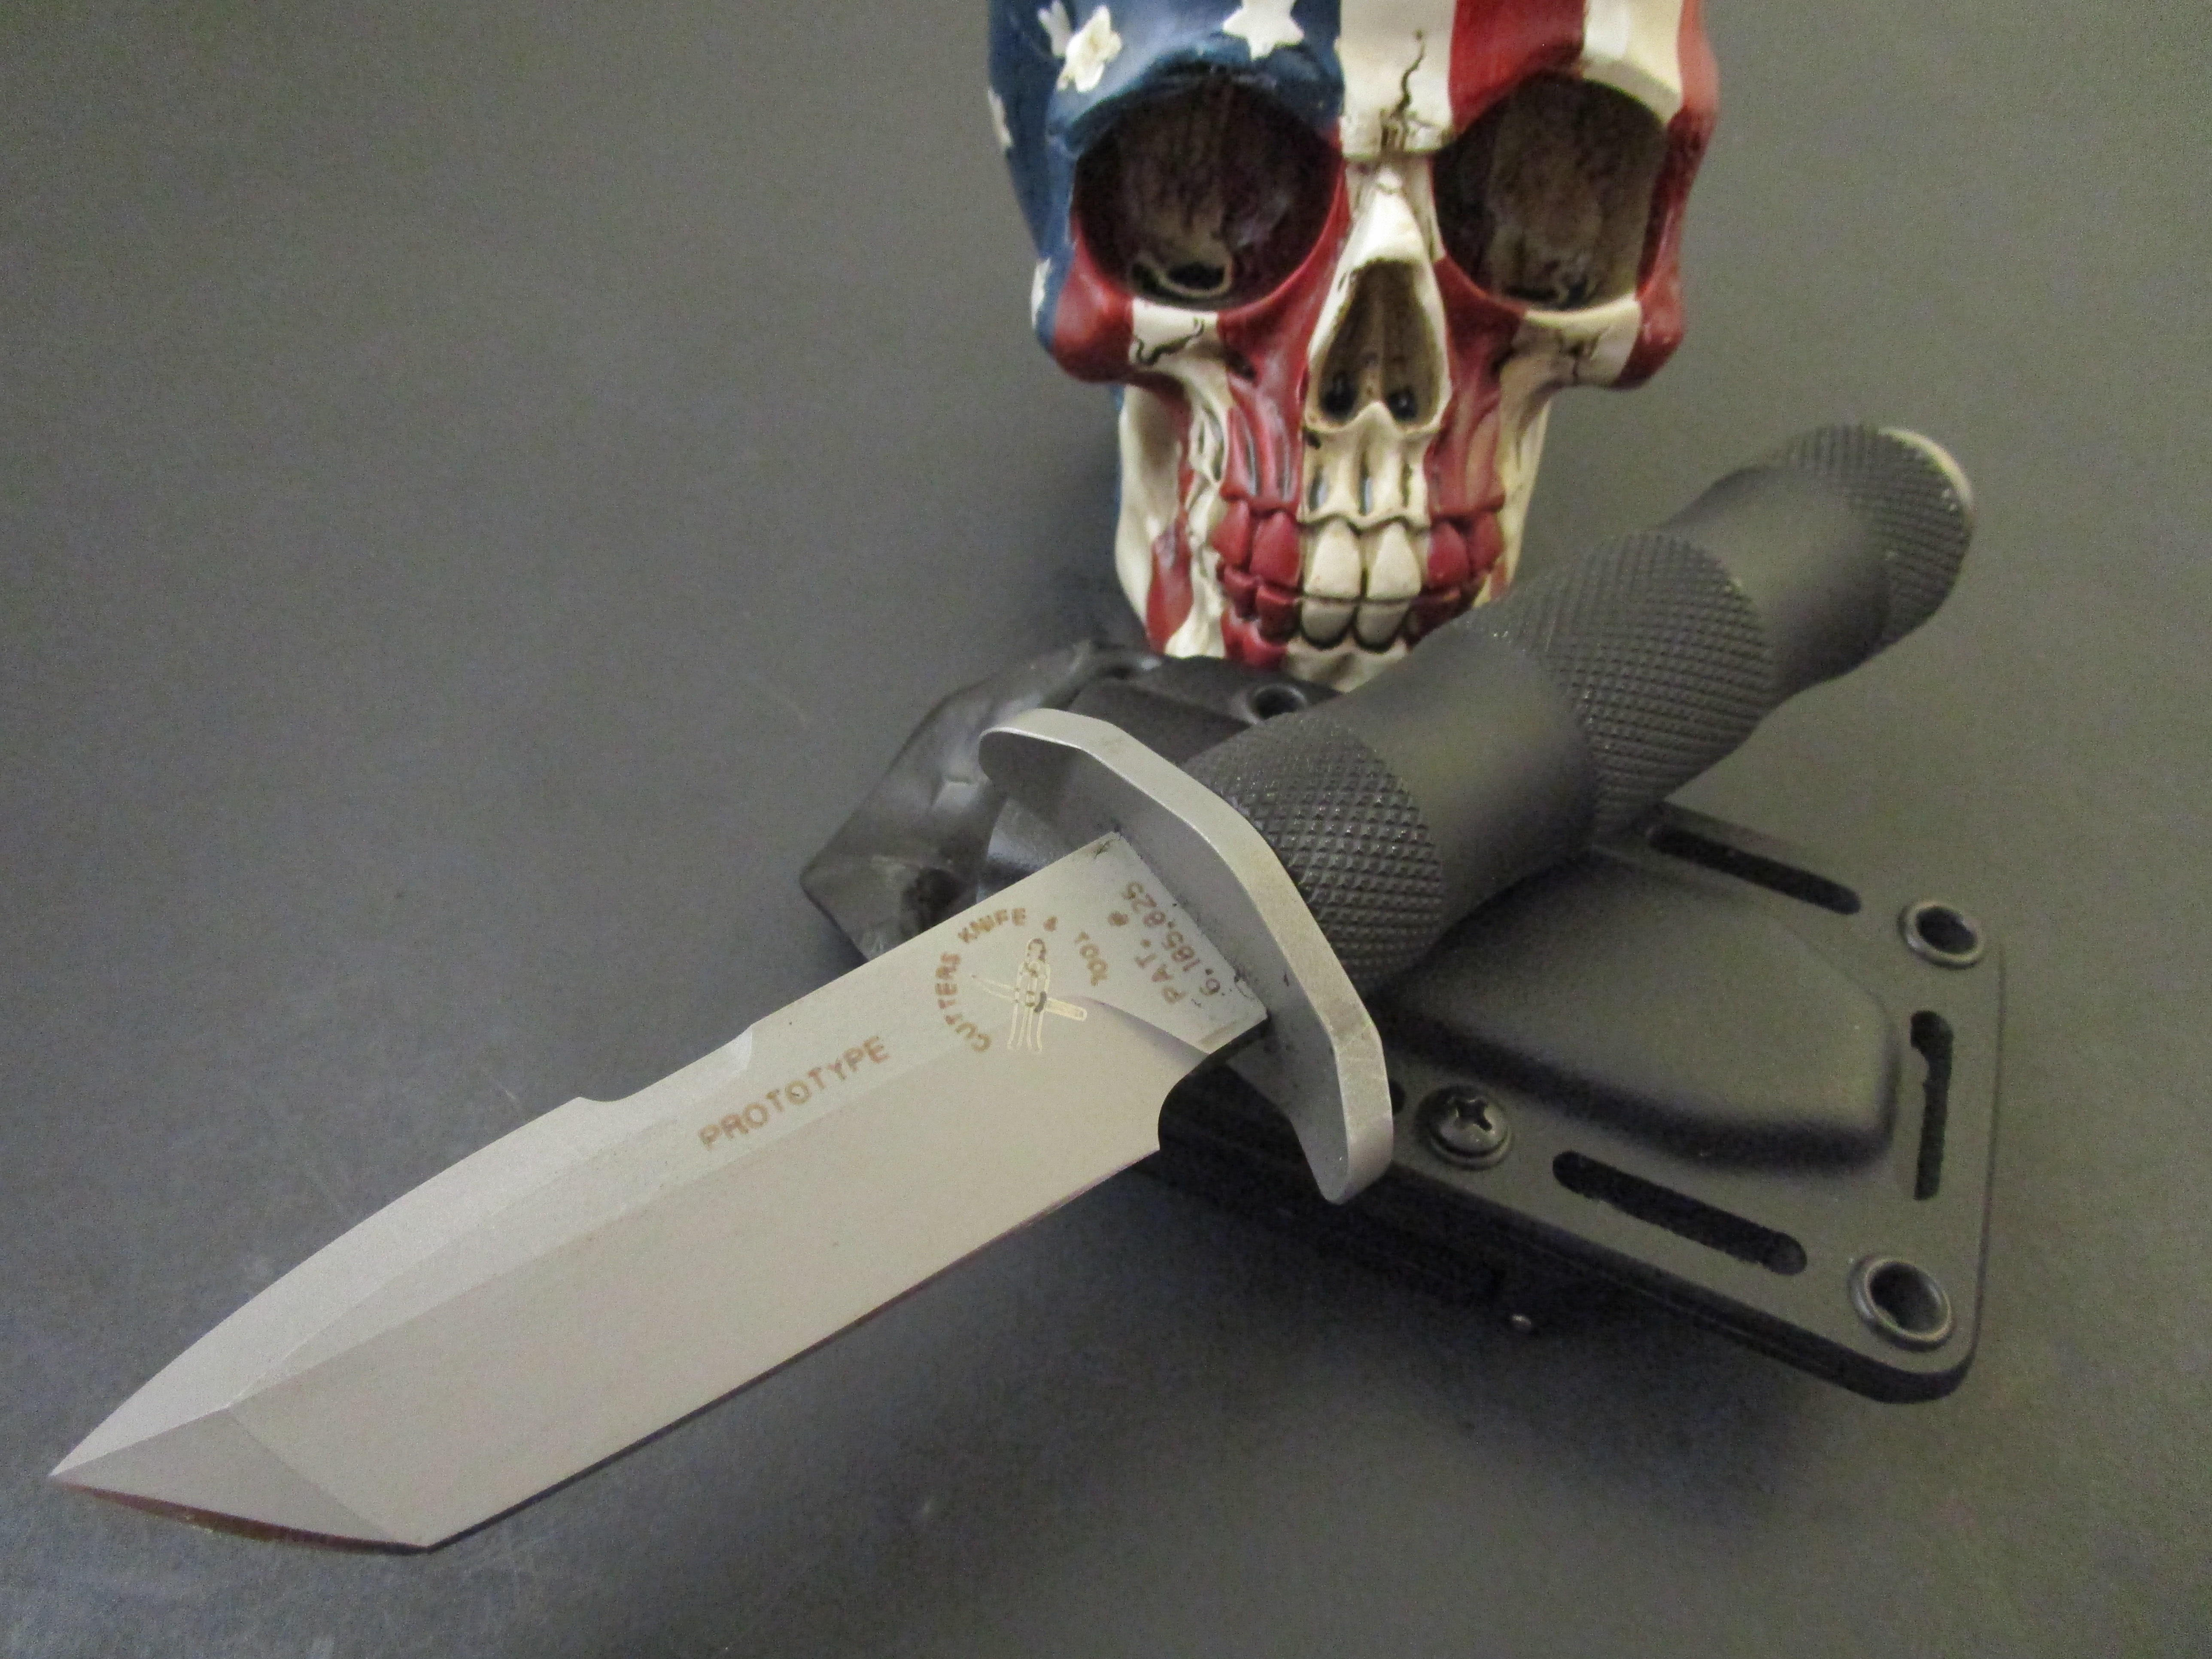 CK&T Cutters Knife and Tool Prototype Seal Team Tanto